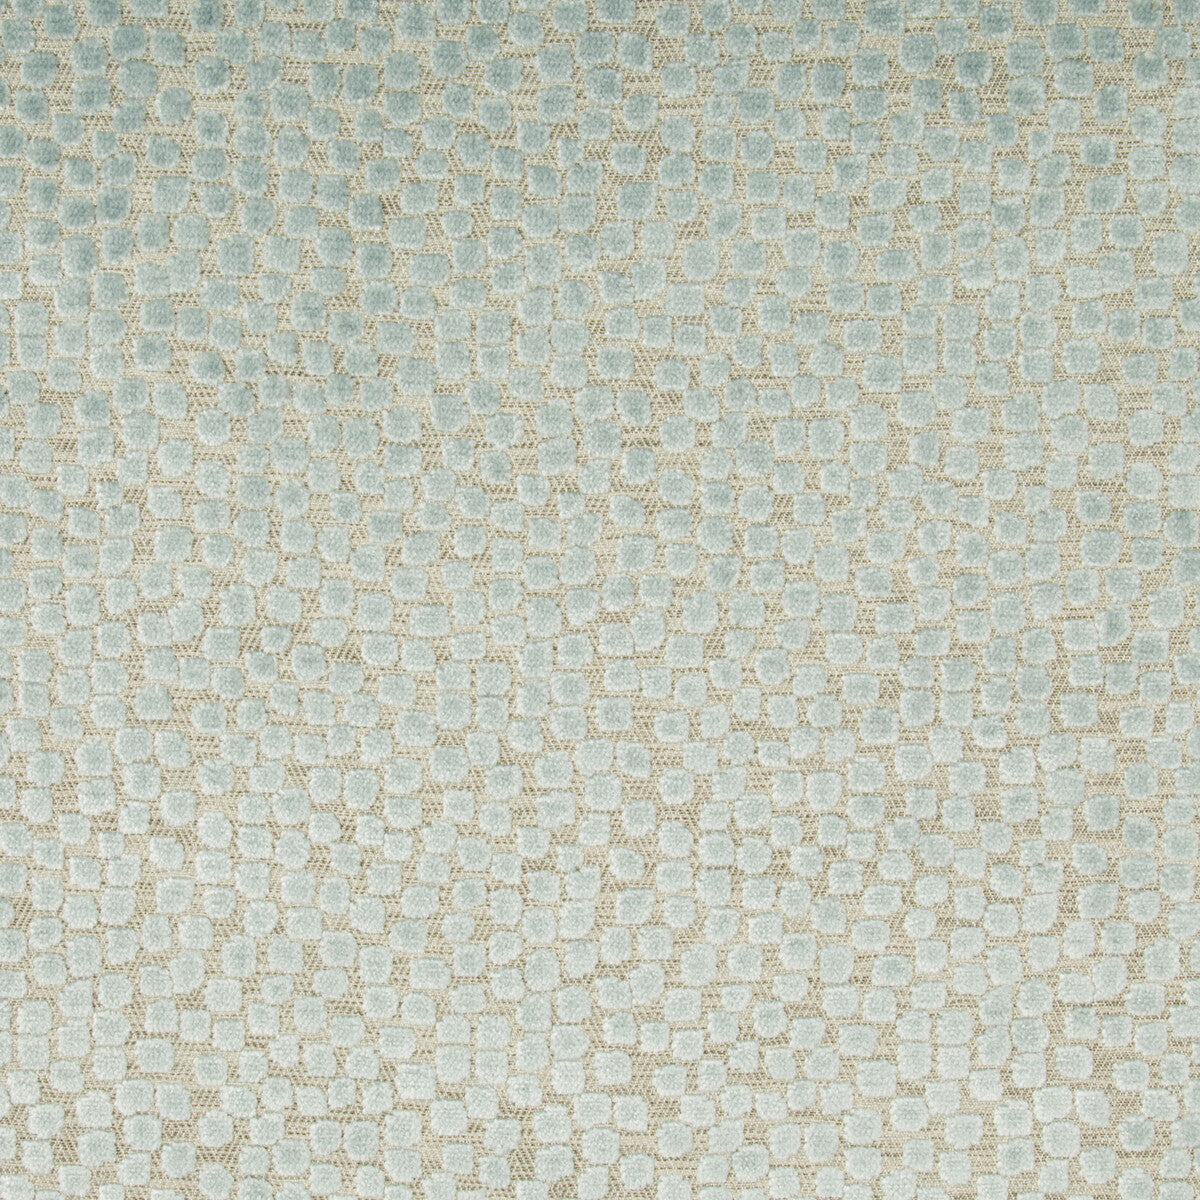 Flurries fabric in seaspray color - pattern 34849.15.0 - by Kravet Design in the Thom Filicia Altitude collection